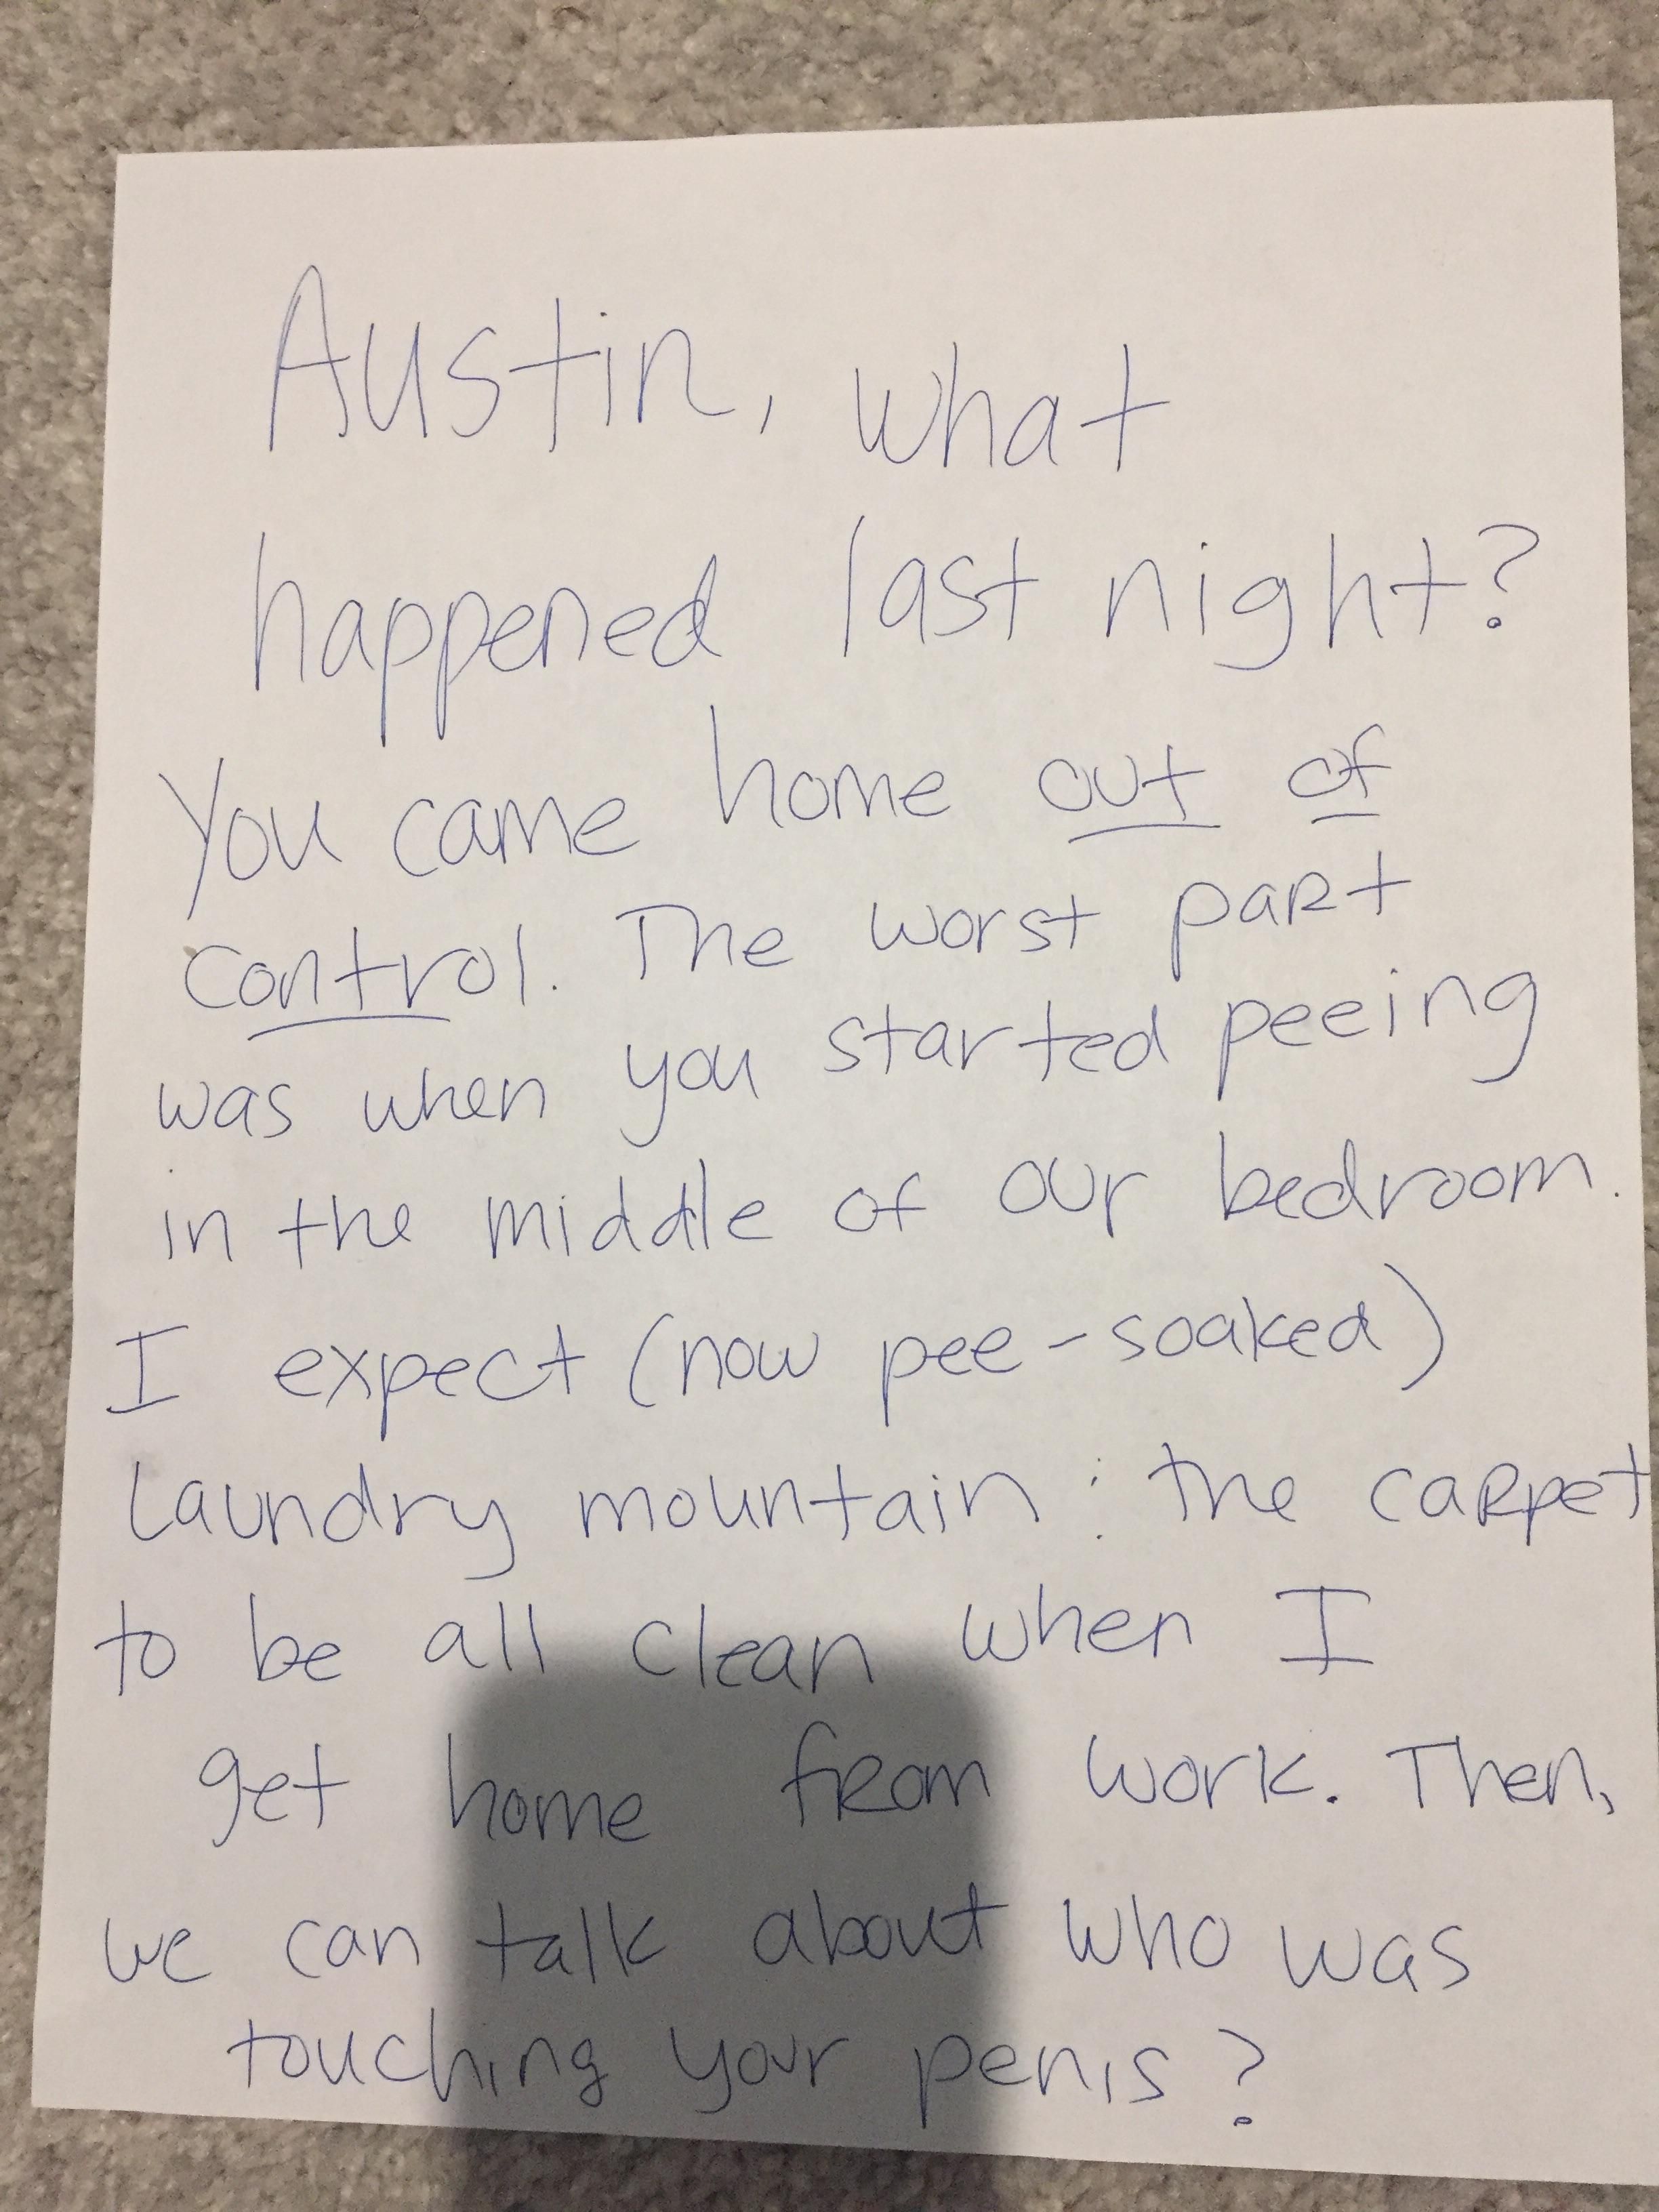 So my buddy and I got hammered last night and he awoke to this note from his fiancée...